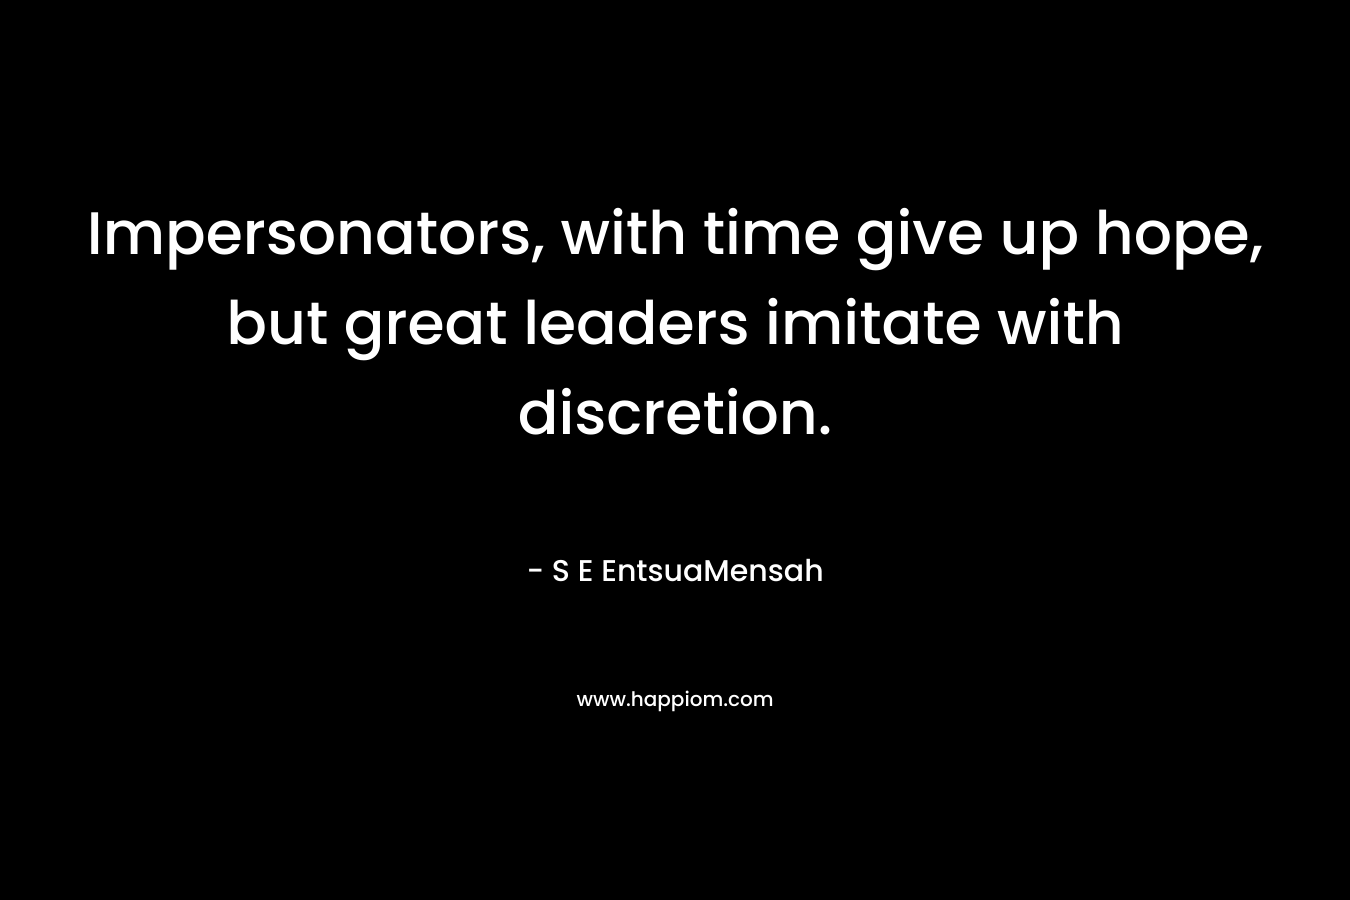 Impersonators, with time give up hope, but great leaders imitate with discretion.